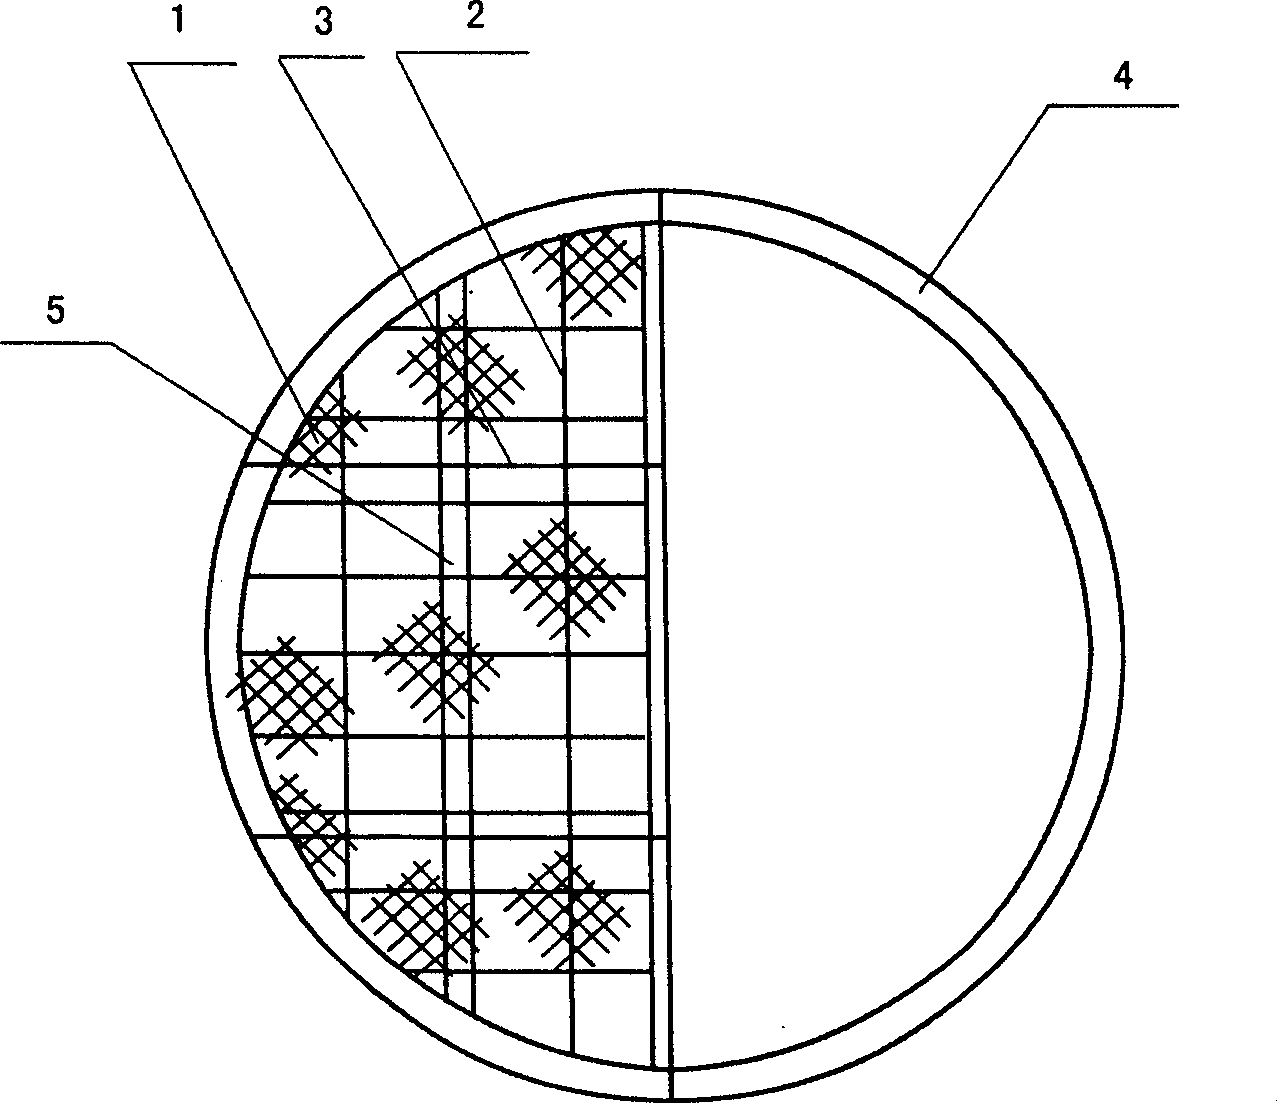 Plastic ripple silk net scum skimmer and the manufacturing method thereof